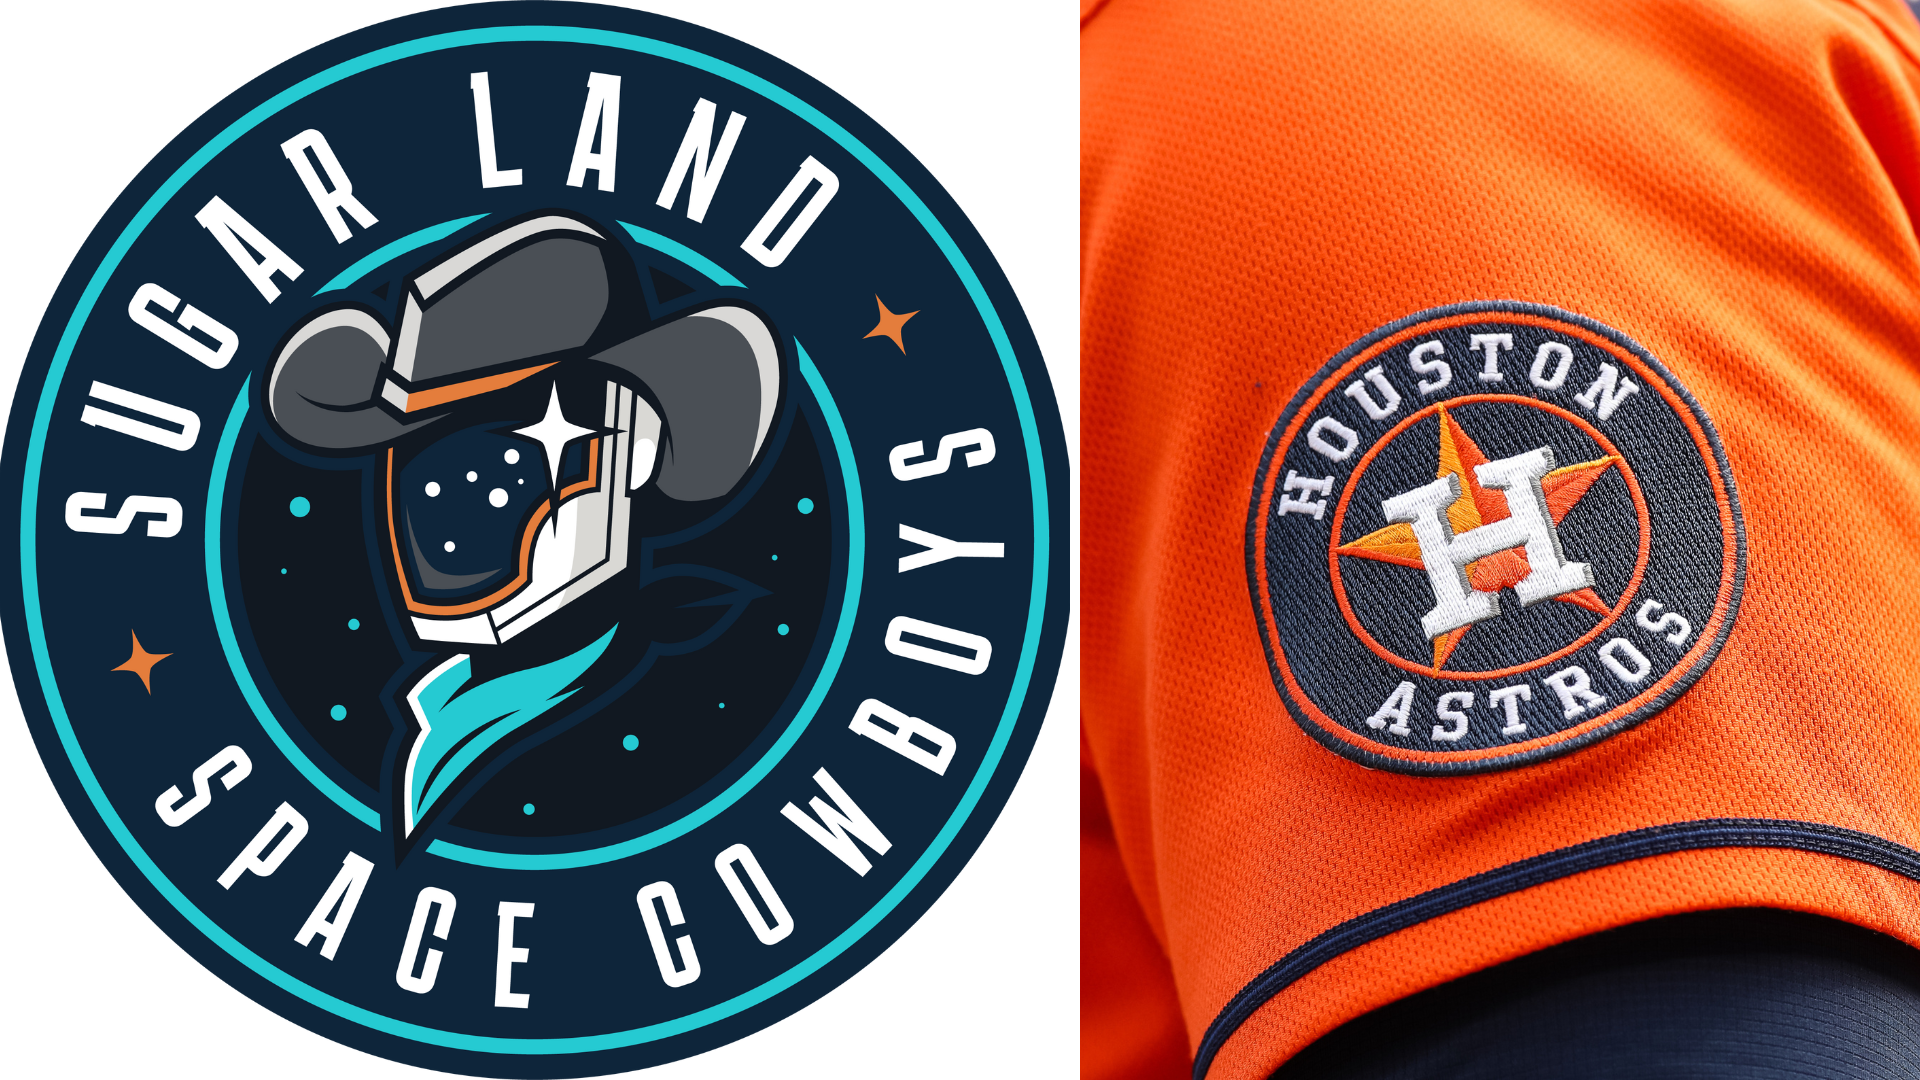 Sugar Land Space Cowboys to host the Houston Astros in series of exhibition  games ahead of season opener